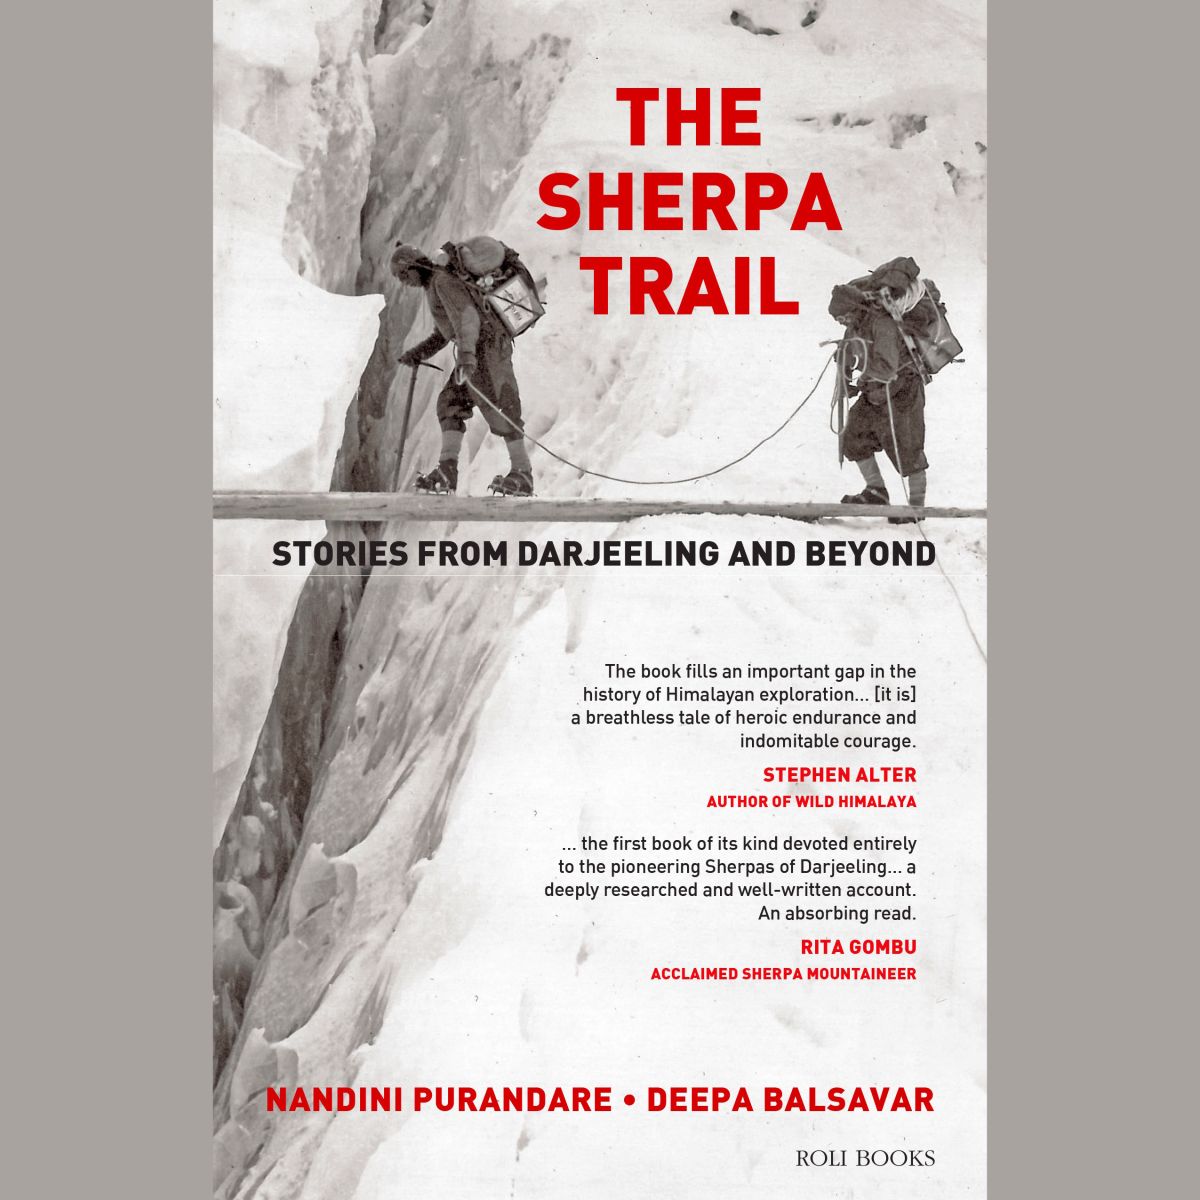 Book Review: The Sherpa Trail – Stories from Darjeeling and Beyond